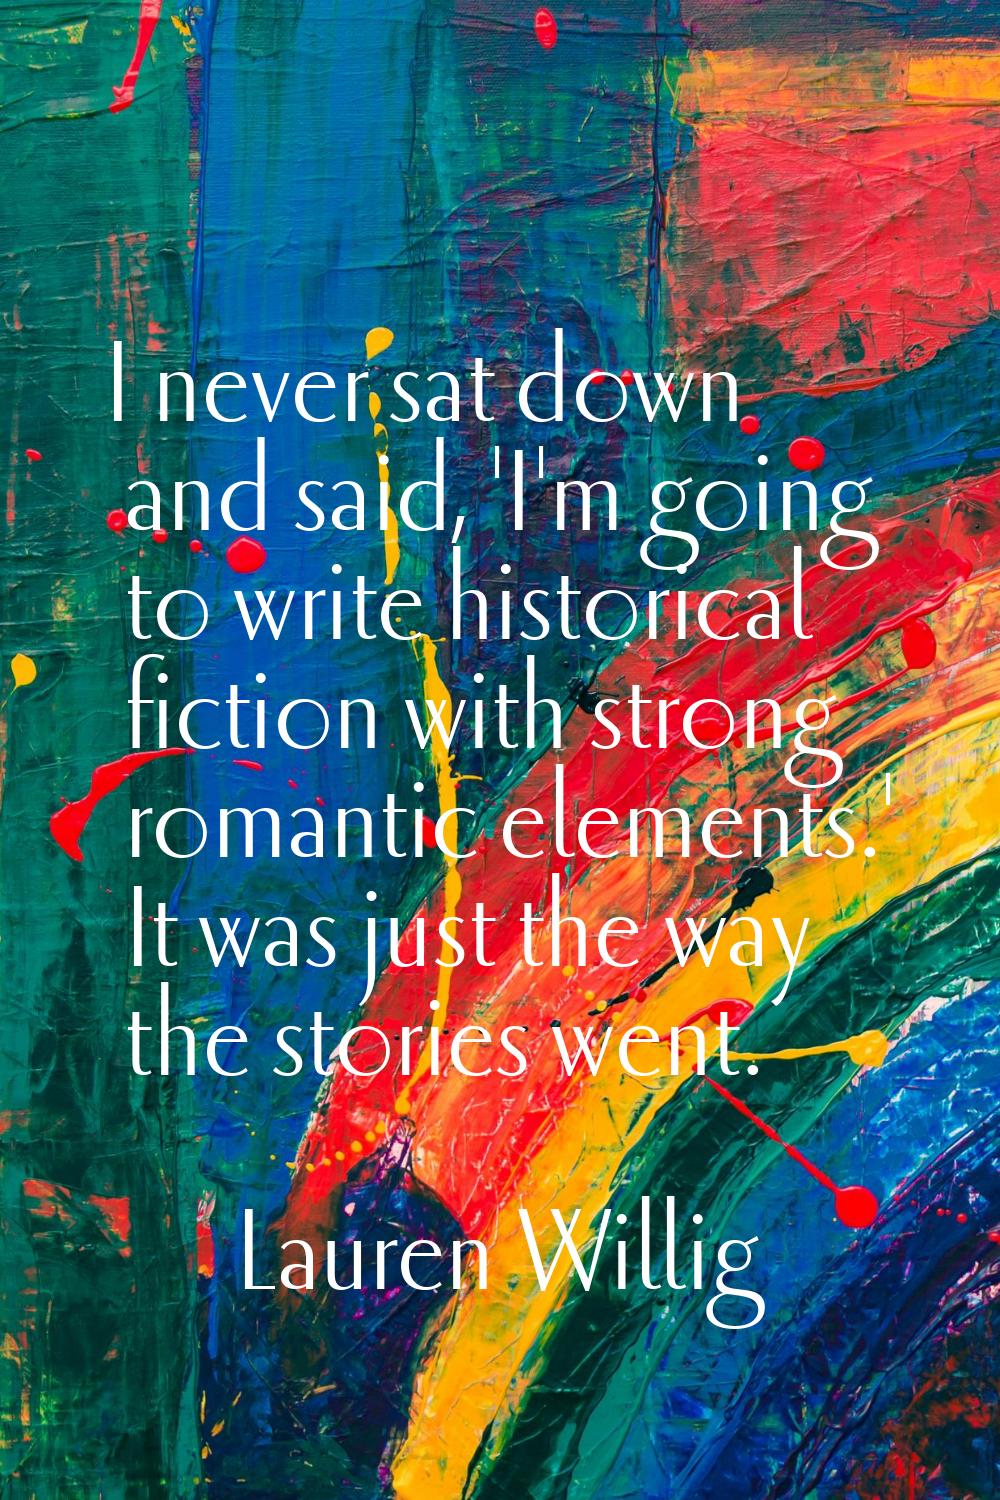 I never sat down and said, 'I'm going to write historical fiction with strong romantic elements.' I